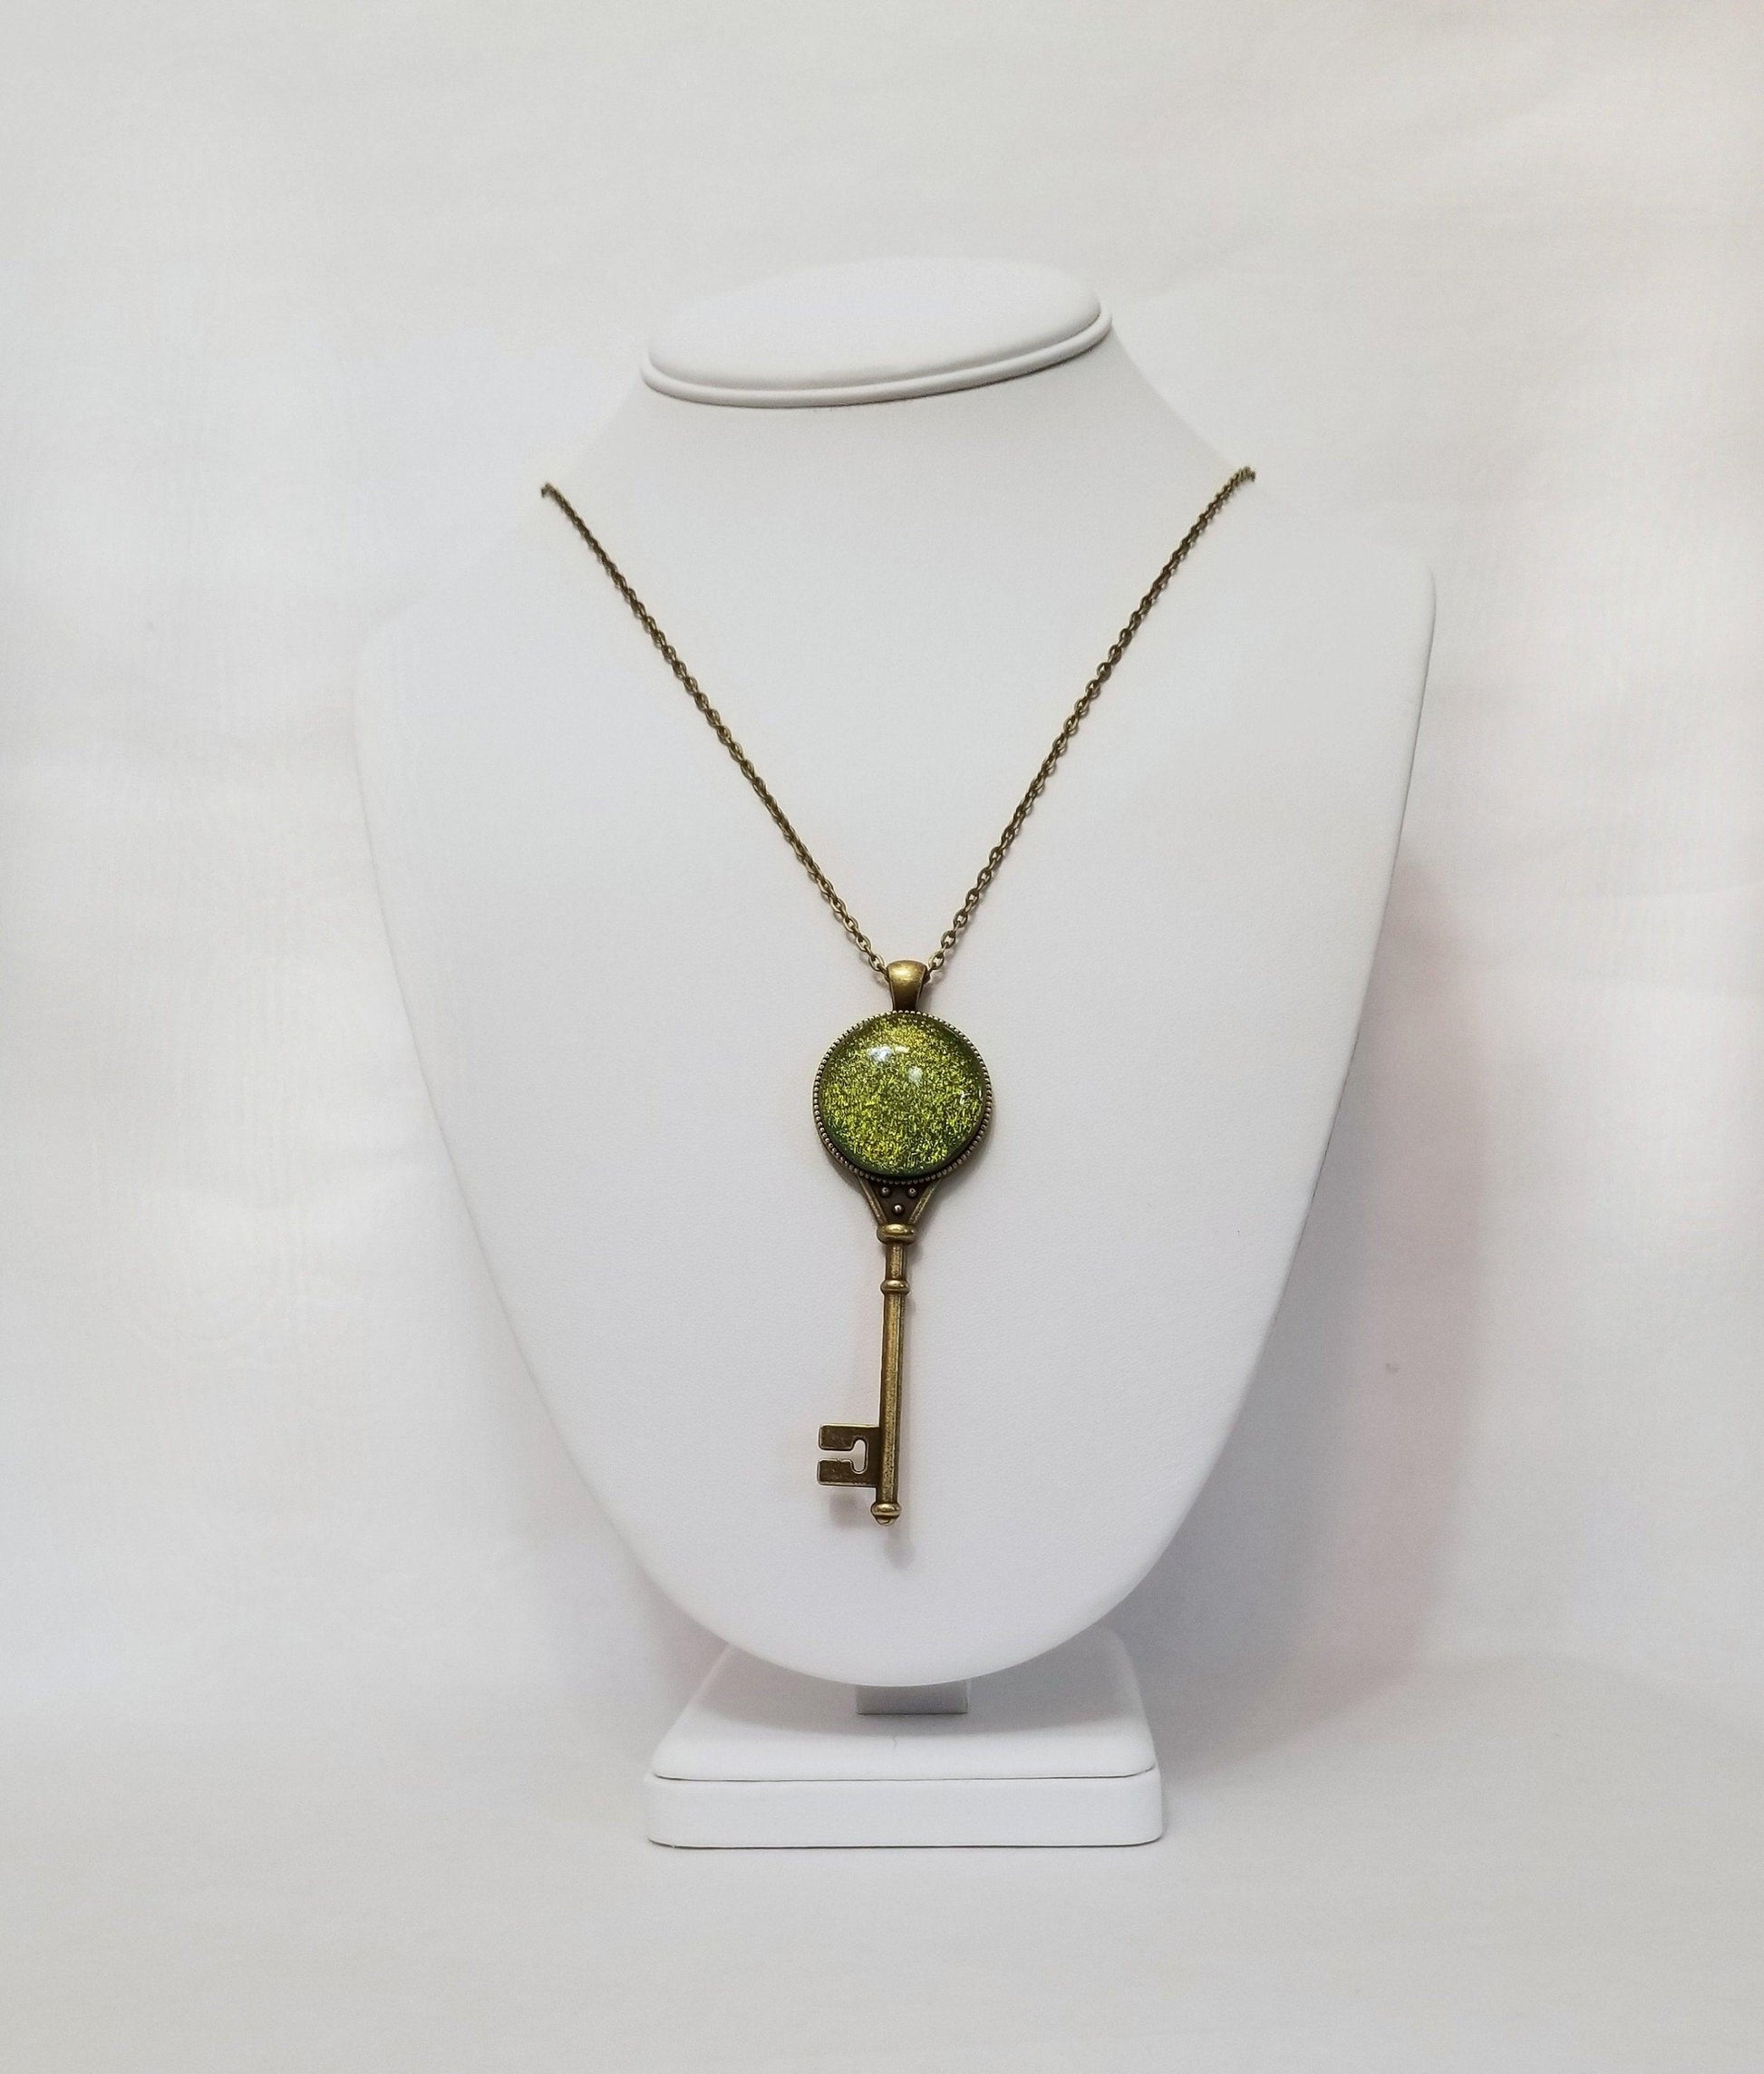 Antiqued Brass  Skeleton Key necklace with Fused Glass Green Dichroic cabochon on 24 inch brass plated chain